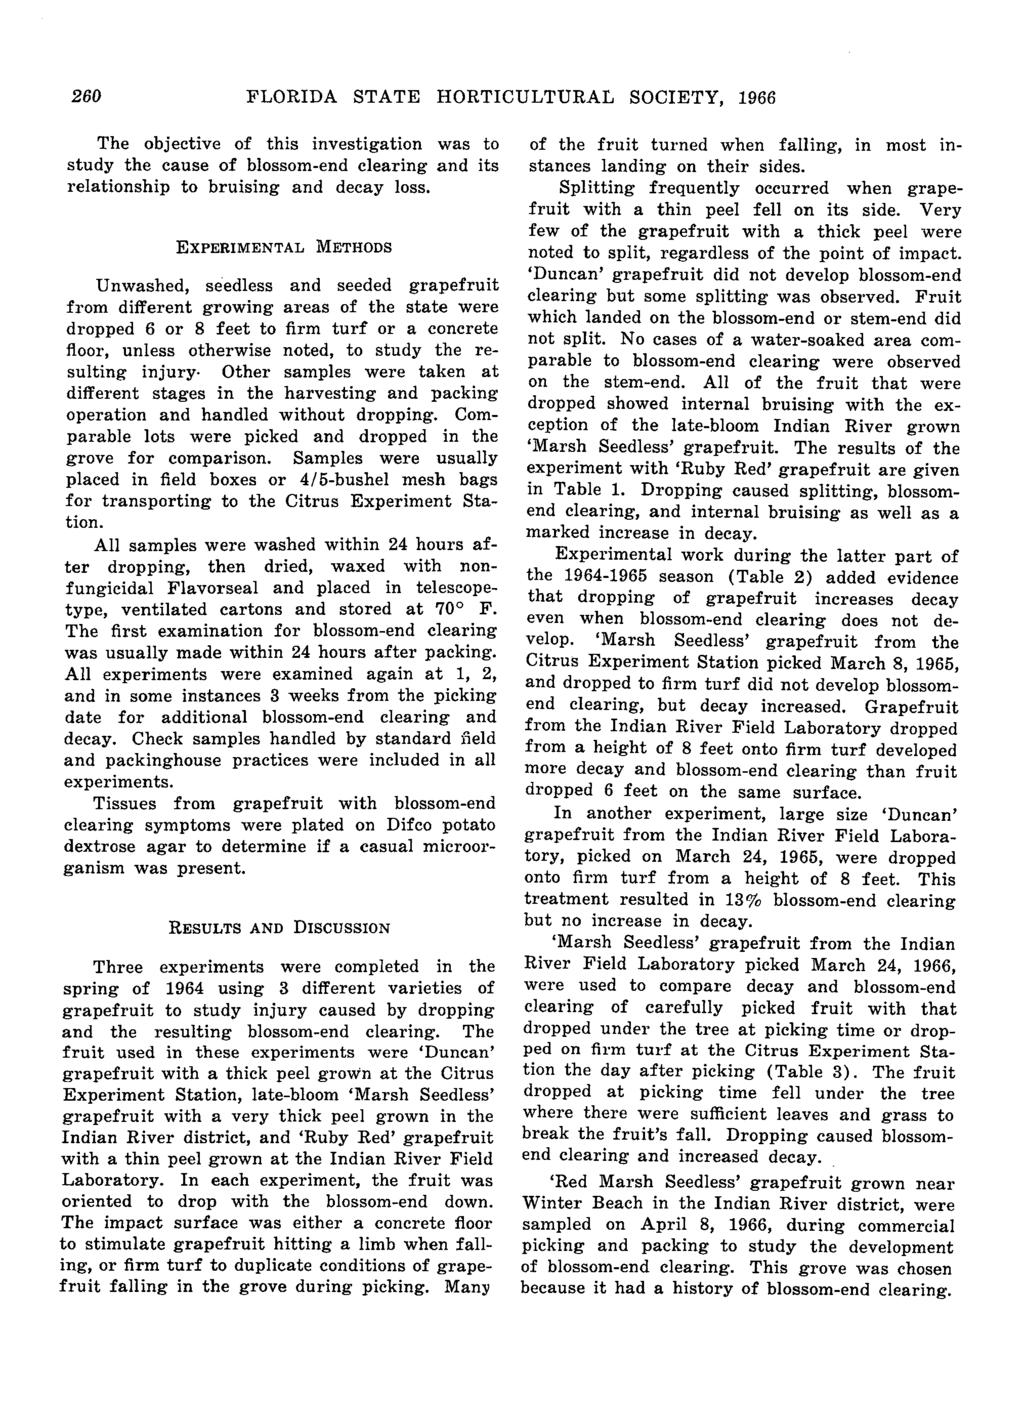 26 FLORIDA STATE HORTICULTURAL SOCIETY, 1966 The objective of this investigation was to study the cause of blossom-end clearing and its relationship to bruising and decay loss.